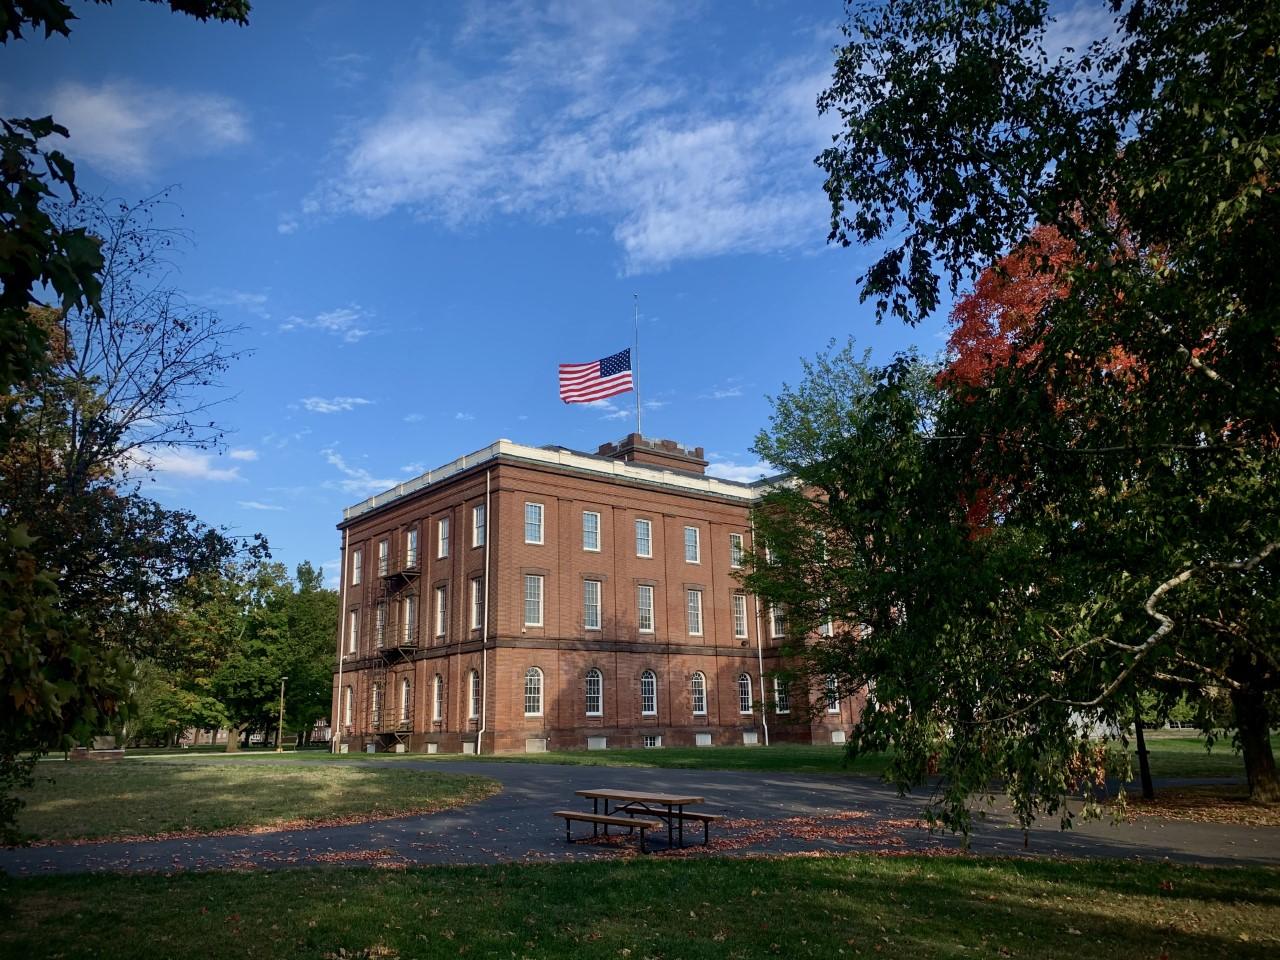 The Springfield Armory Main Arsenal on a fall day, with blue skies and the flag at half staff.